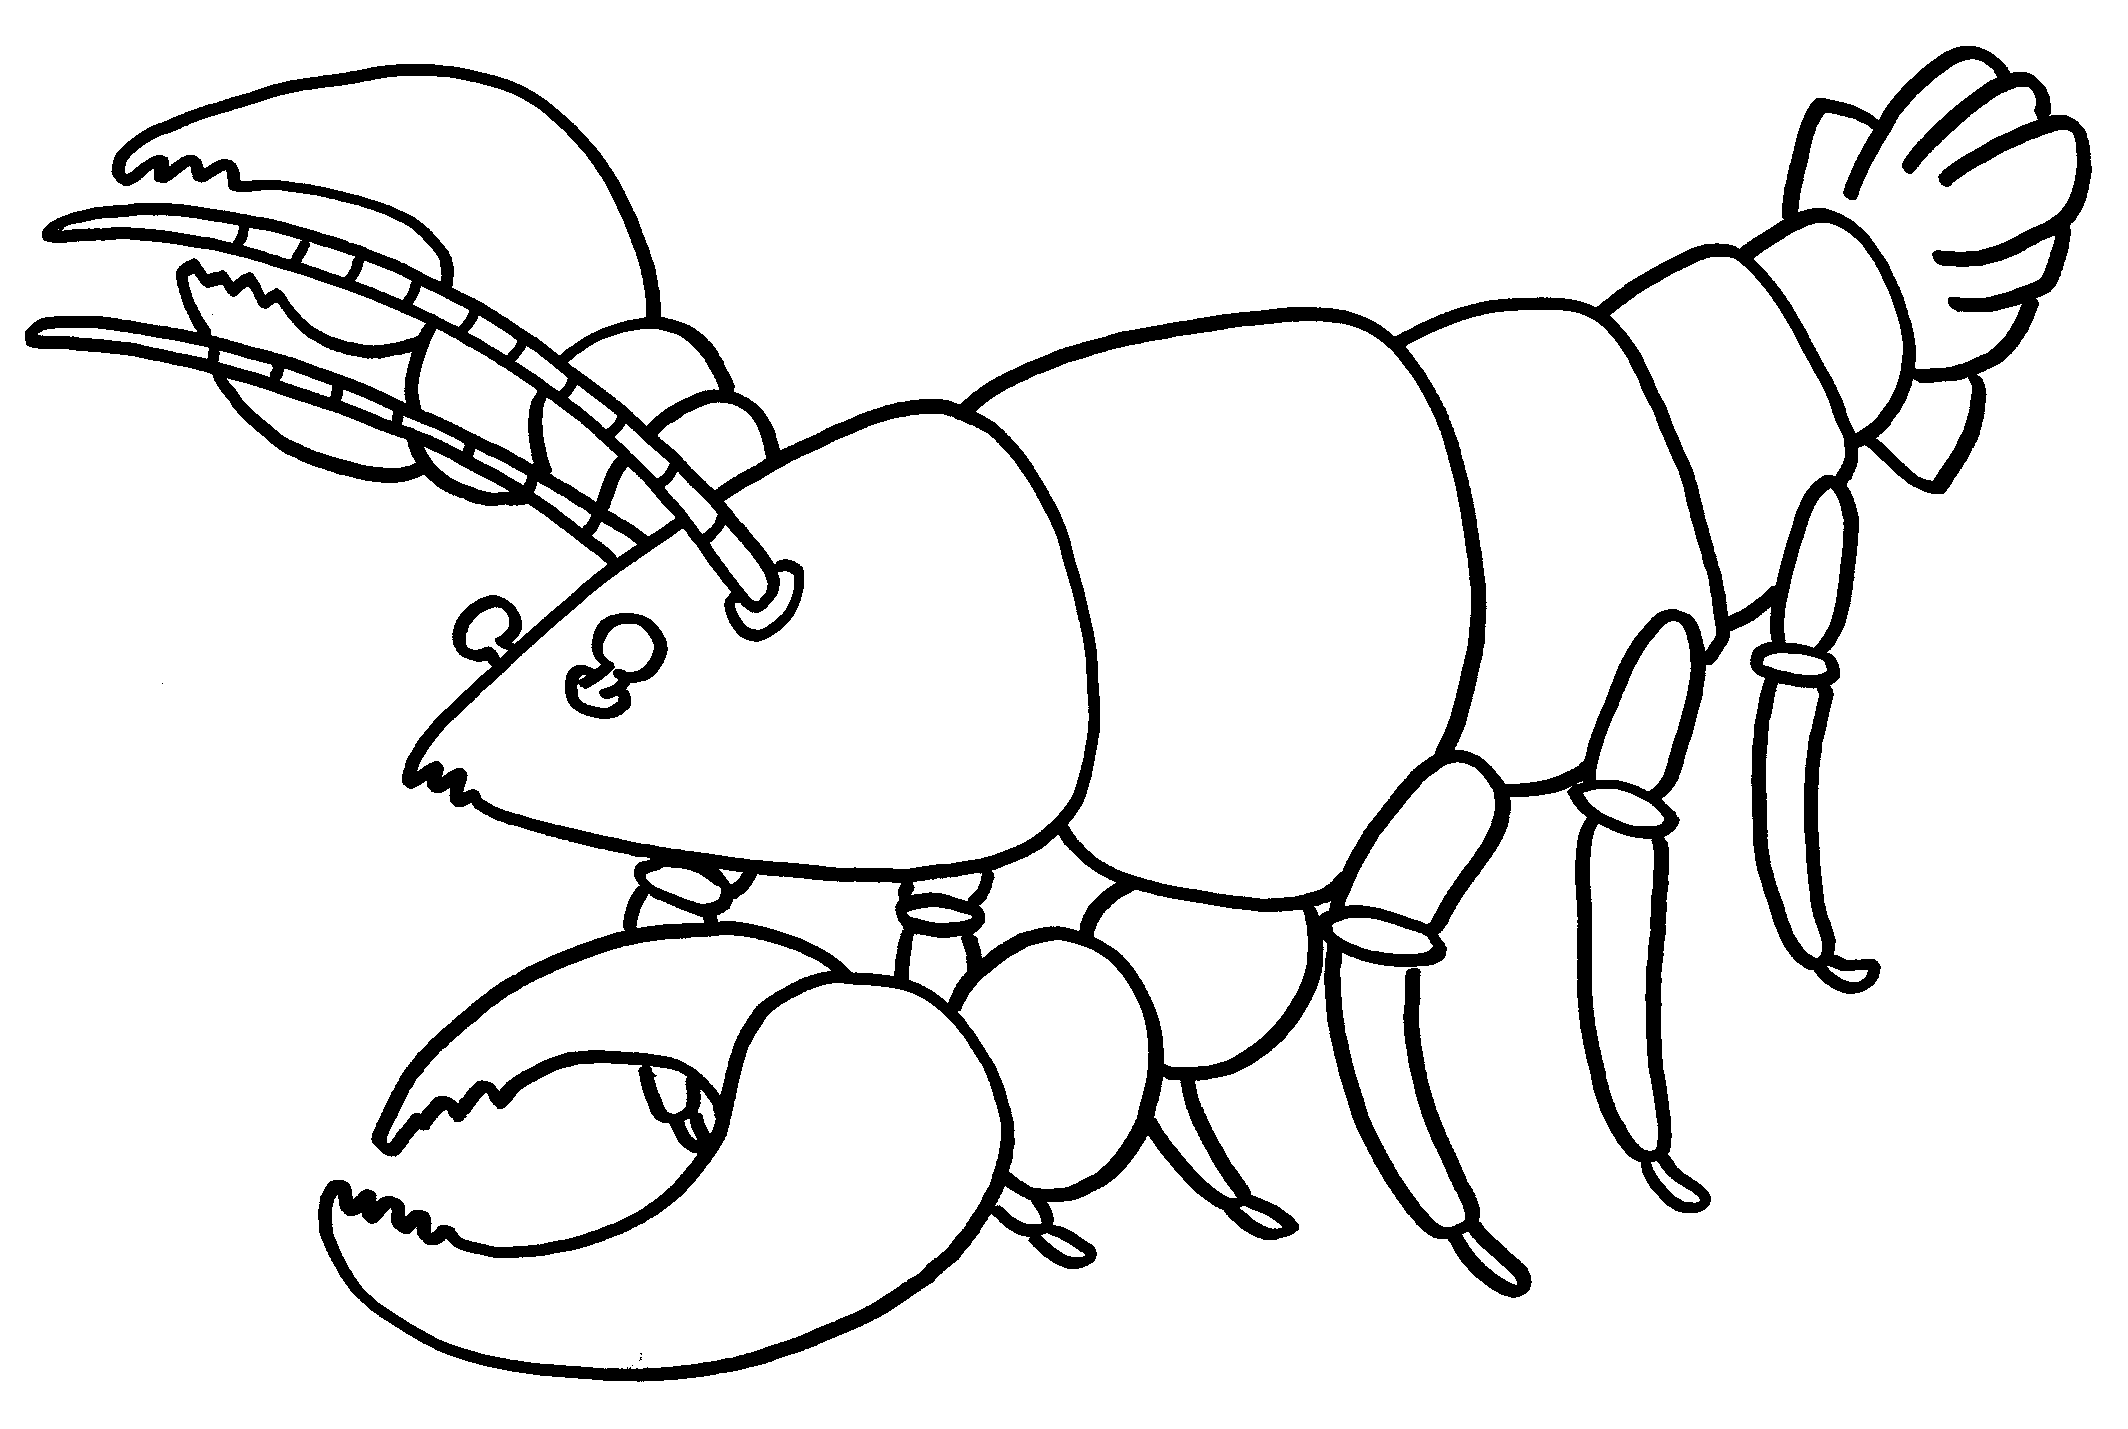 Coloring Page - Lobster